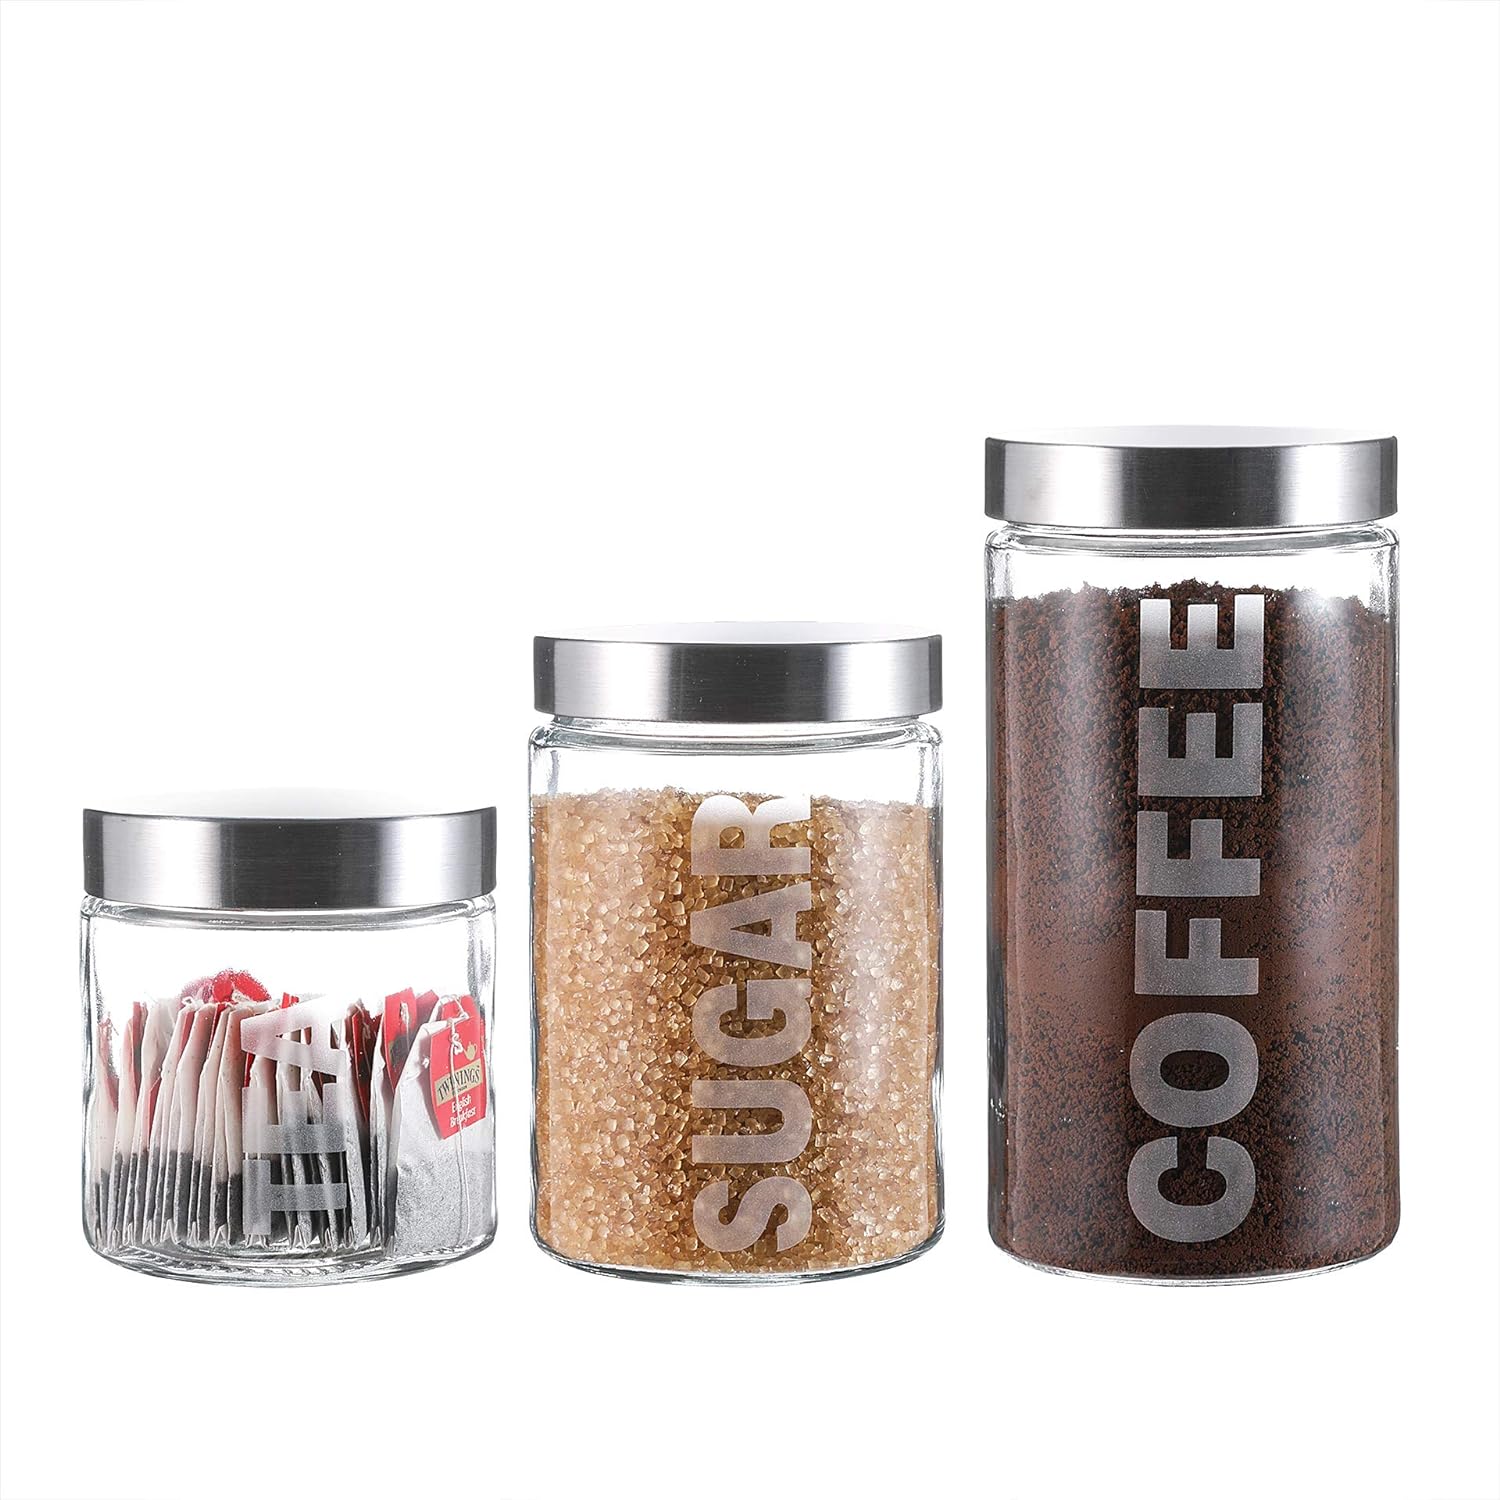 WHOLE HOUSEWARES Airtight Glass Canister Set for Coffee, Tea, and Sugar - 3-Piece Container Set with Stainless Steel Lids - Clear Glass Jars for Kitchen Storage